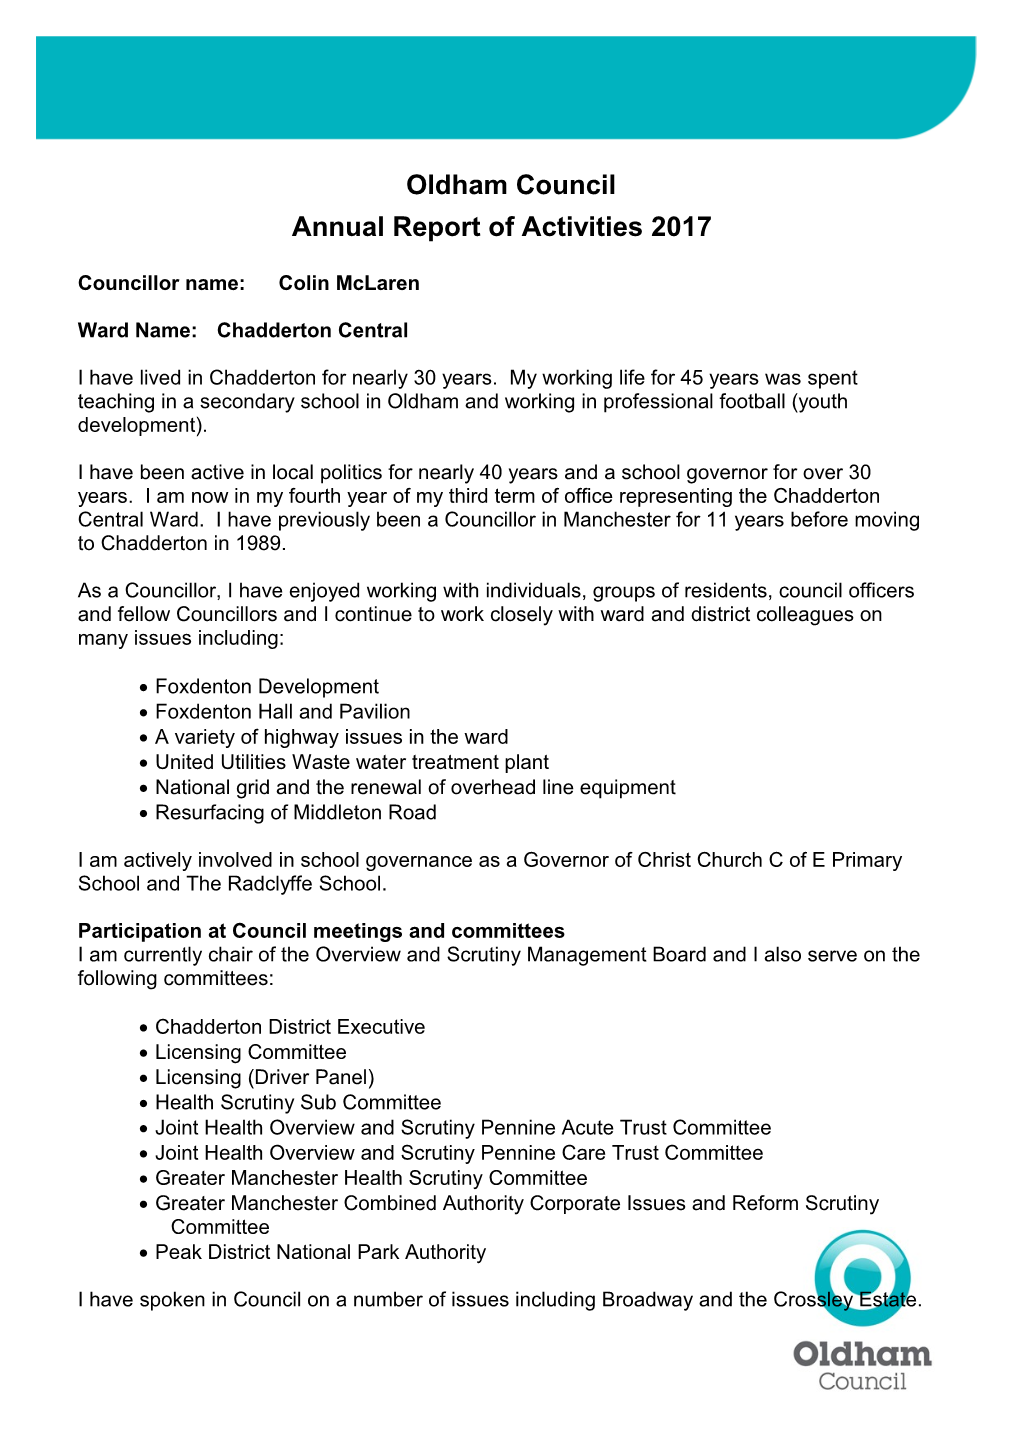 Cllr Report Template